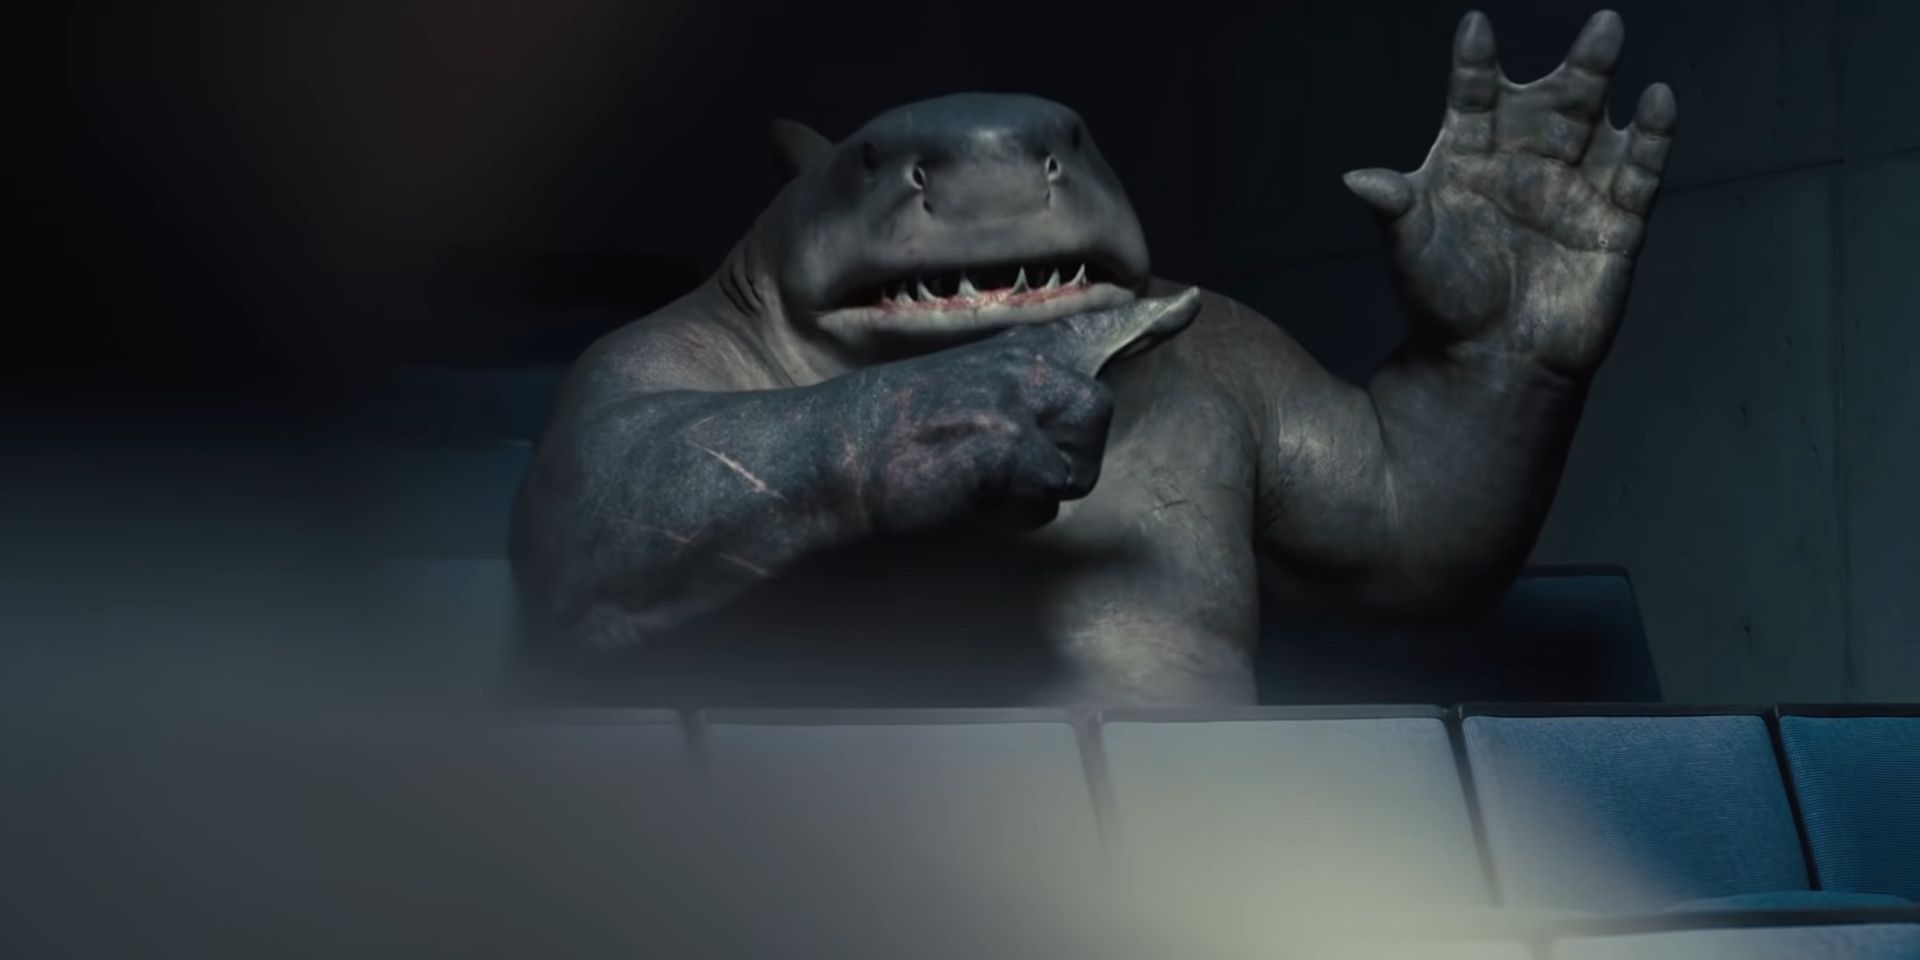 King Shark pointing out his hand is a hand in The Suicide Squad